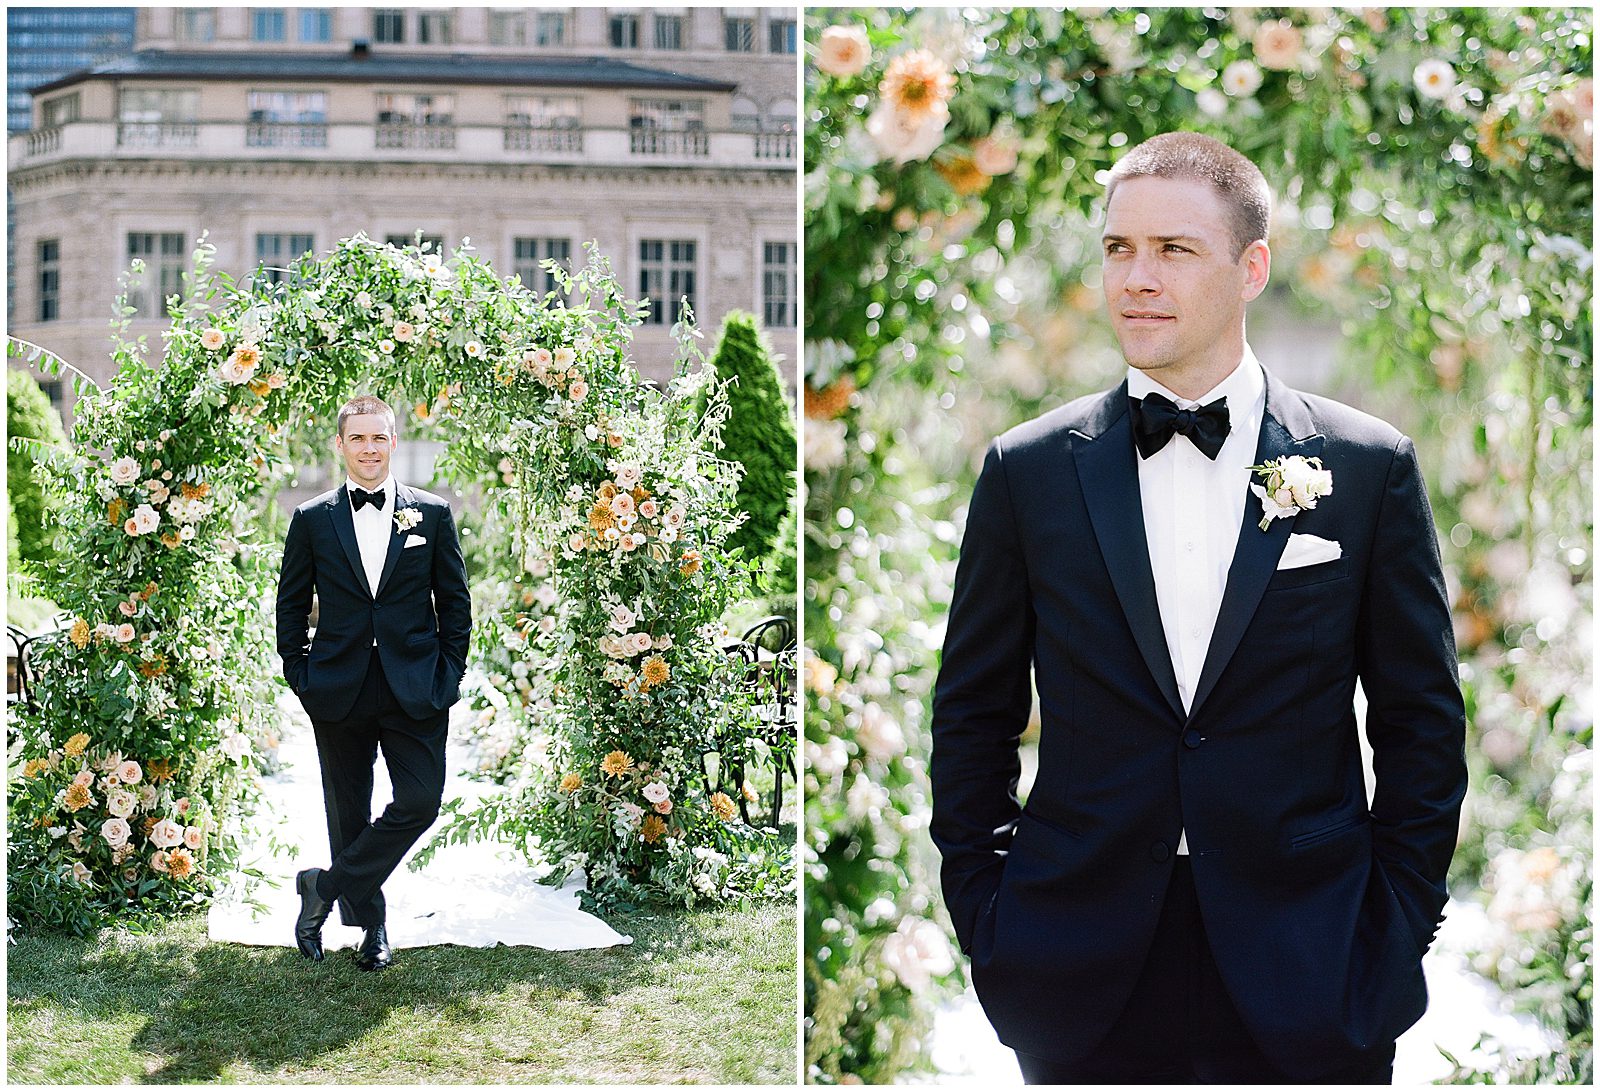 Groom Smiling In Front Of Flower Arch at New York City Wedding Venue Photos